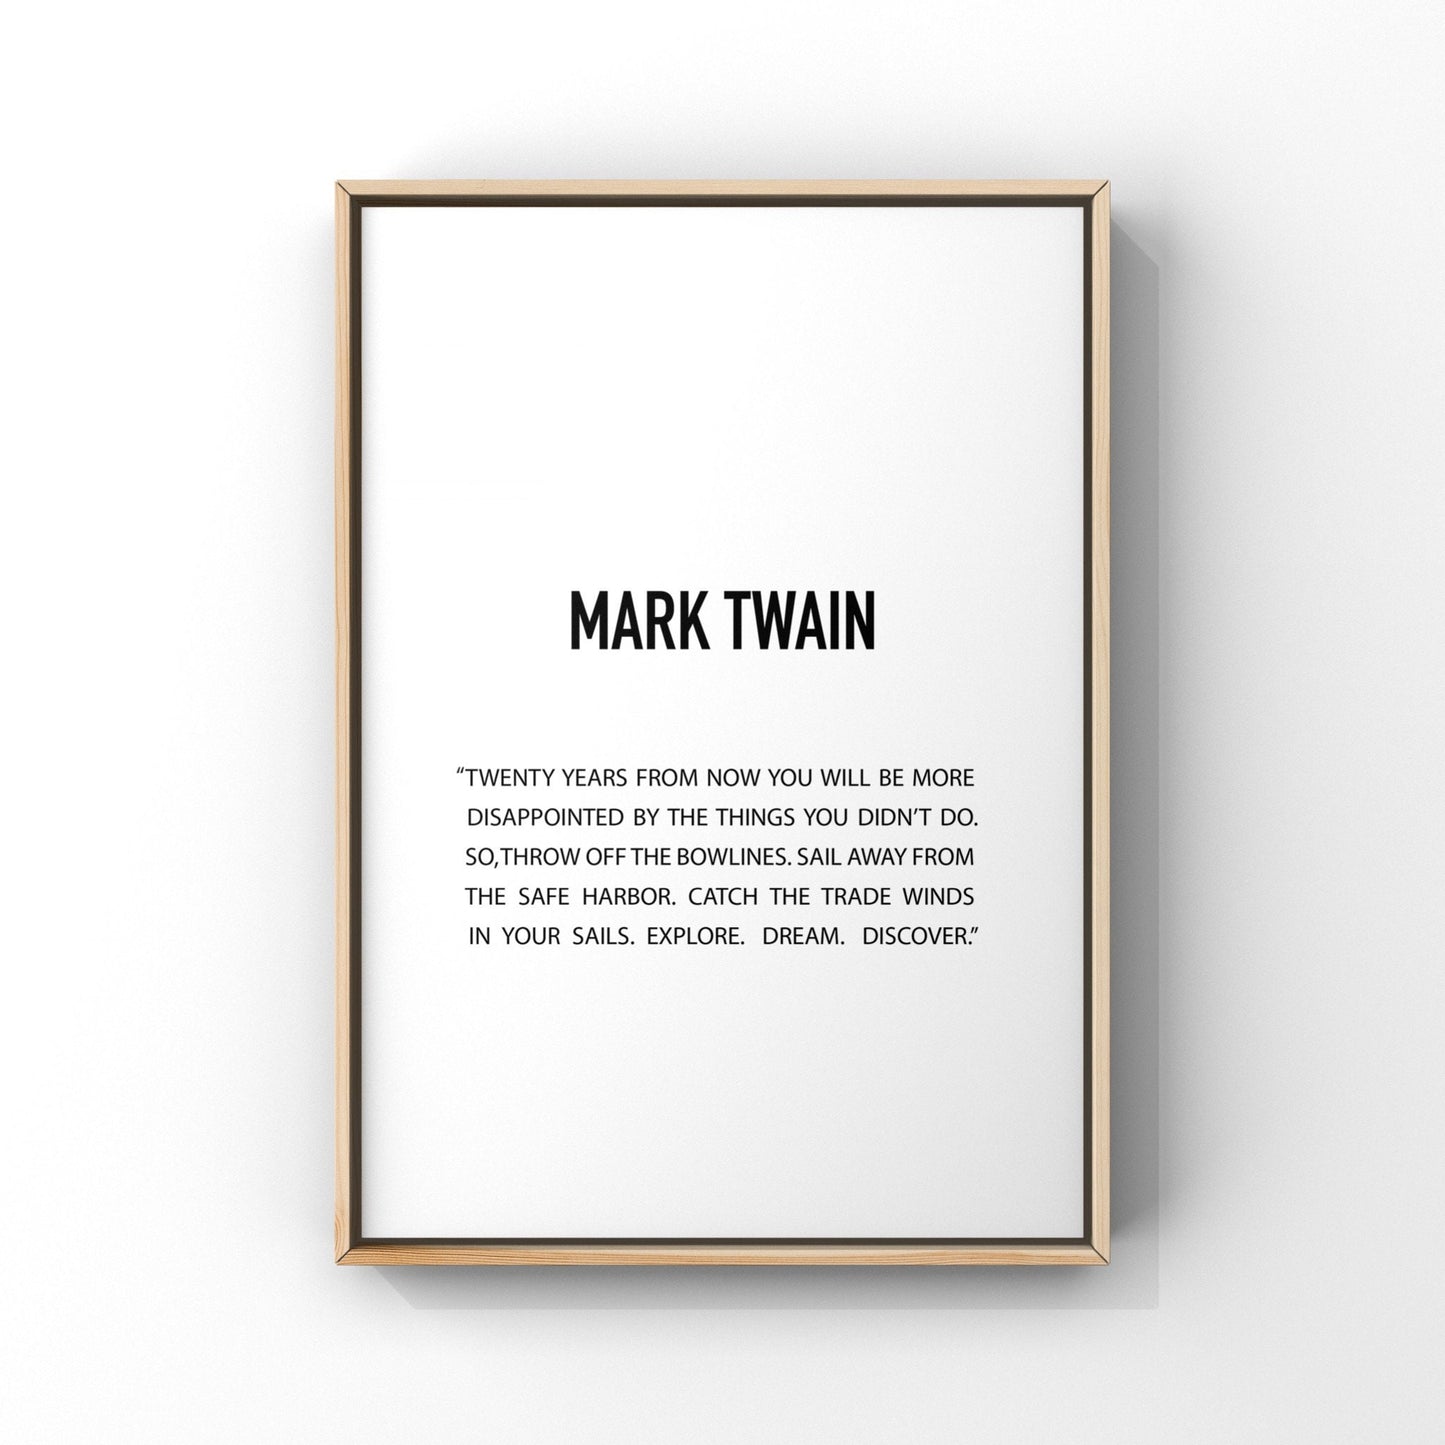 Twenty years from now,Mark Twain quote,Graduation gift,Inspirational print,Motivational saying,Quote wall art,Explore dream discover